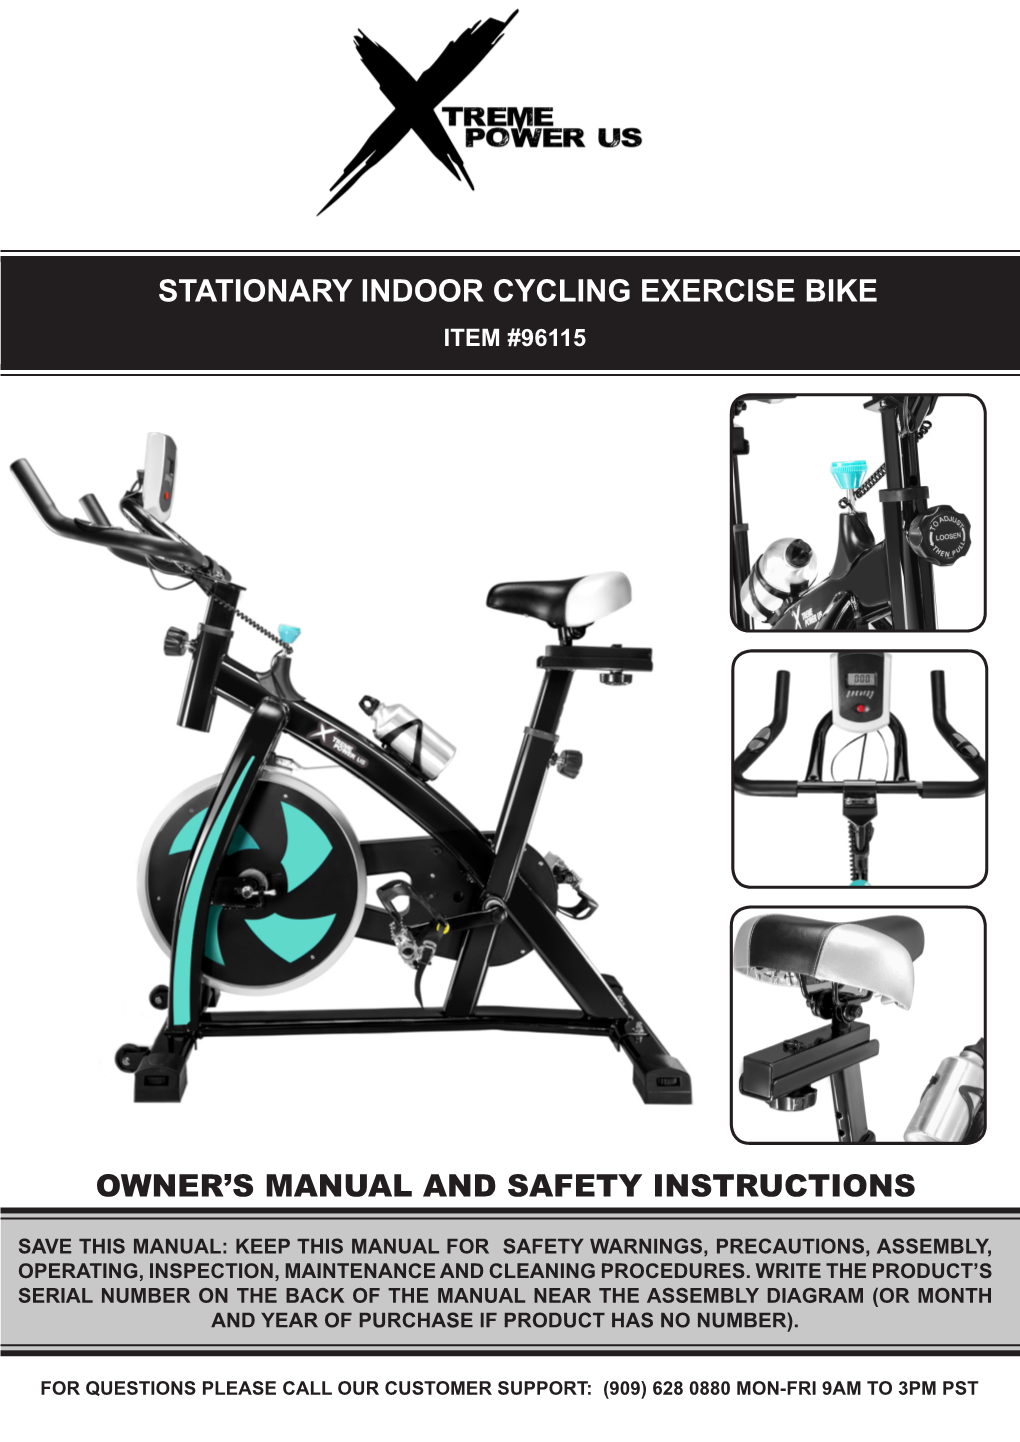 Stationary Indoor Cycling Exercise Bike Item #96115